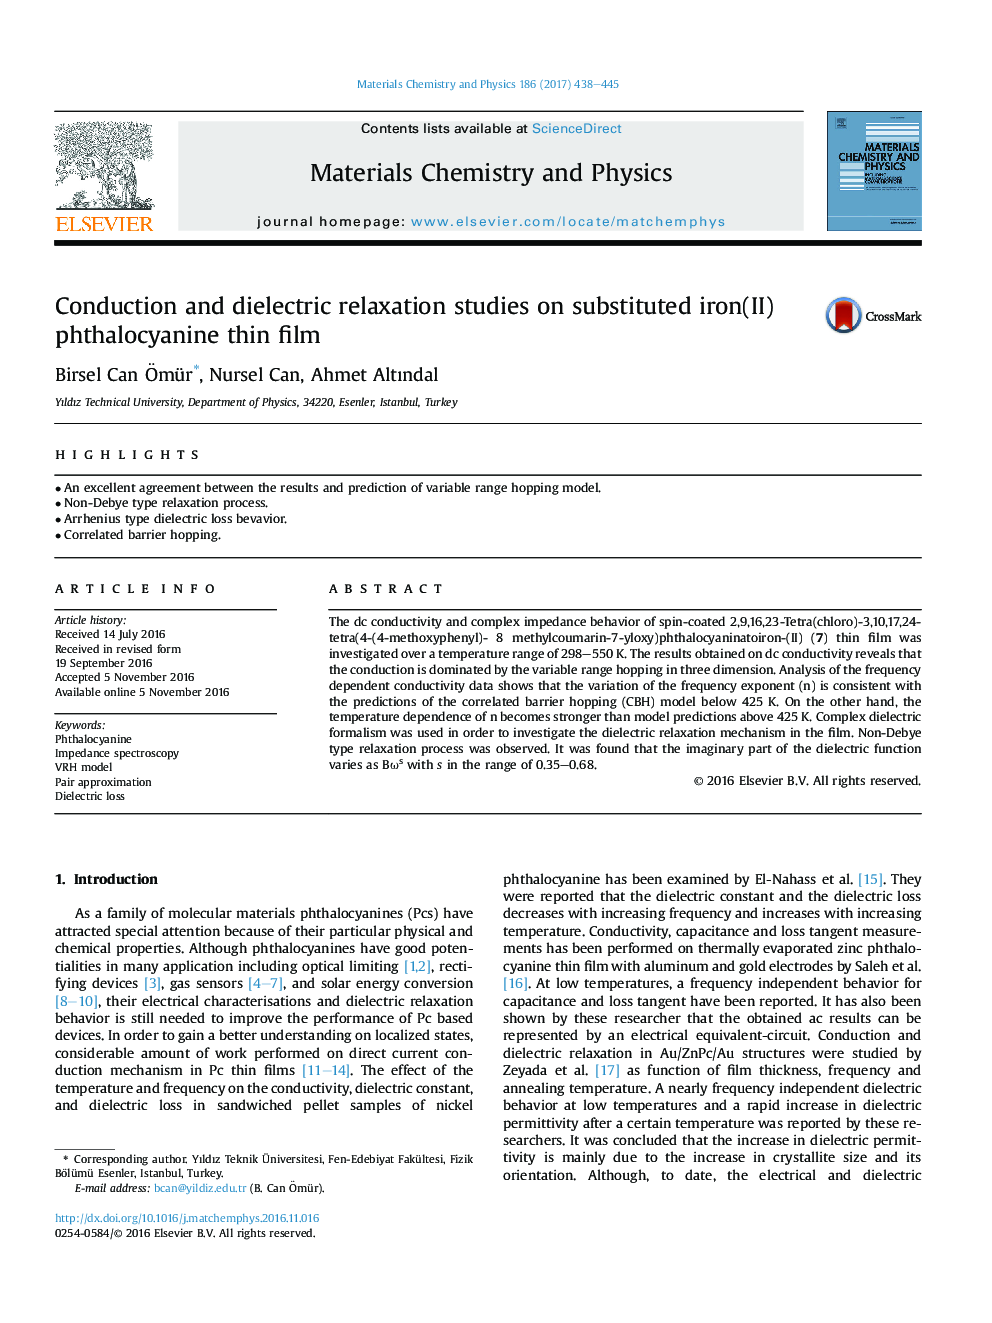 Conduction and dielectric relaxation studies on substituted iron(II) phthalocyanine thin film